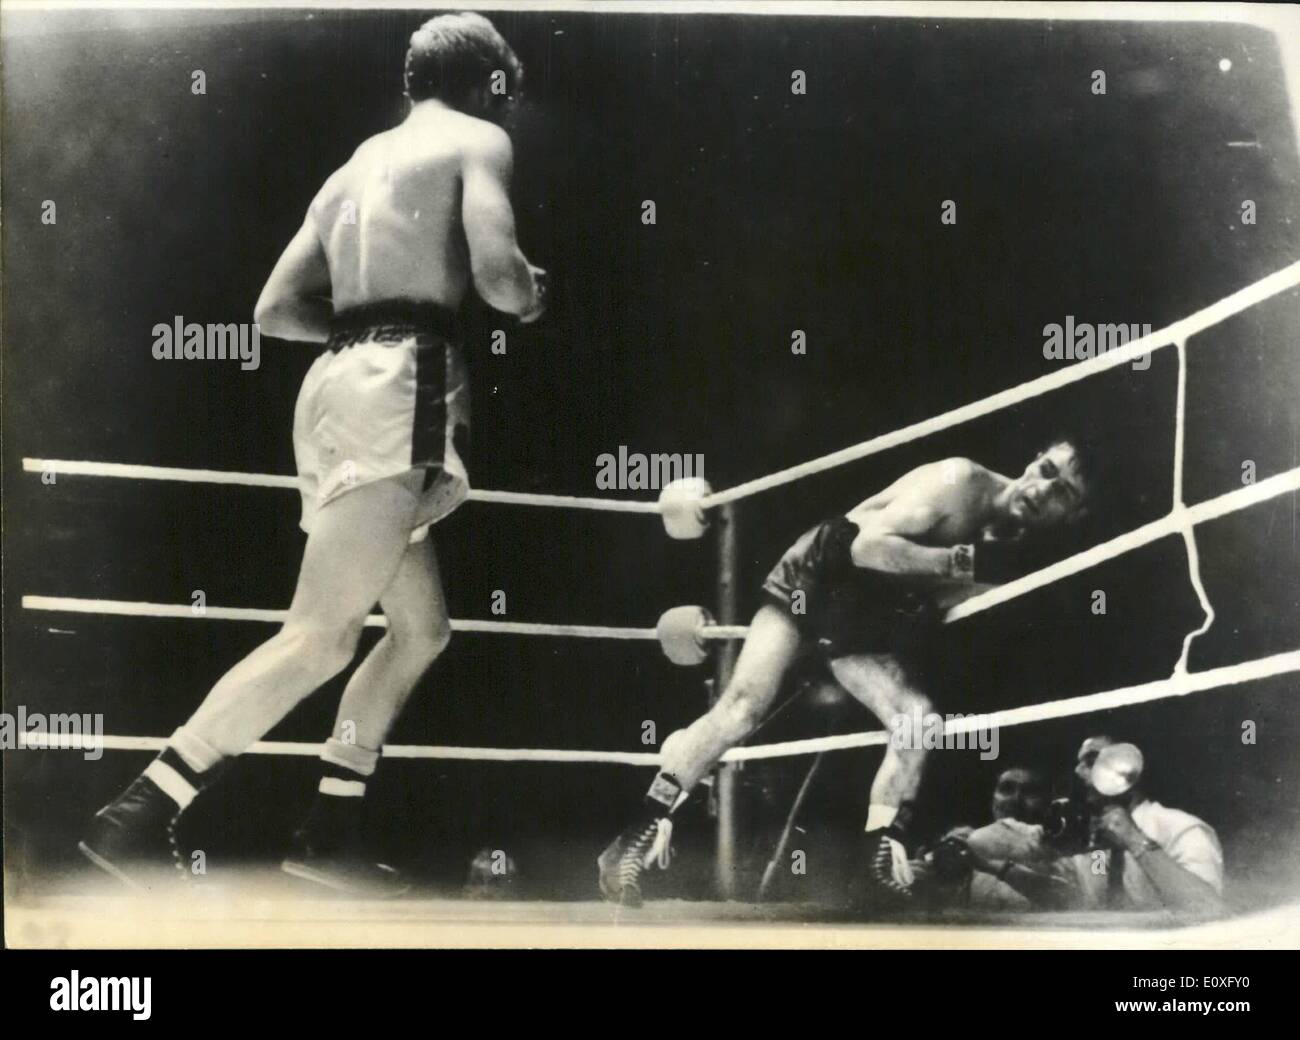 Sep. 09, 1966 - Walter McGowan adds the British and Empire bantam titles to his World Flyweight title.: Walter McGowan, flyweight champion of the world, snatched the British and Empire bantamweight titles from Liverpool's Alan Rudkin by defeating him over 15 rounds at Wembley last night. Photo shows McGowan is snat back to the ropes from an attack at Wembley last night. Stock Photo